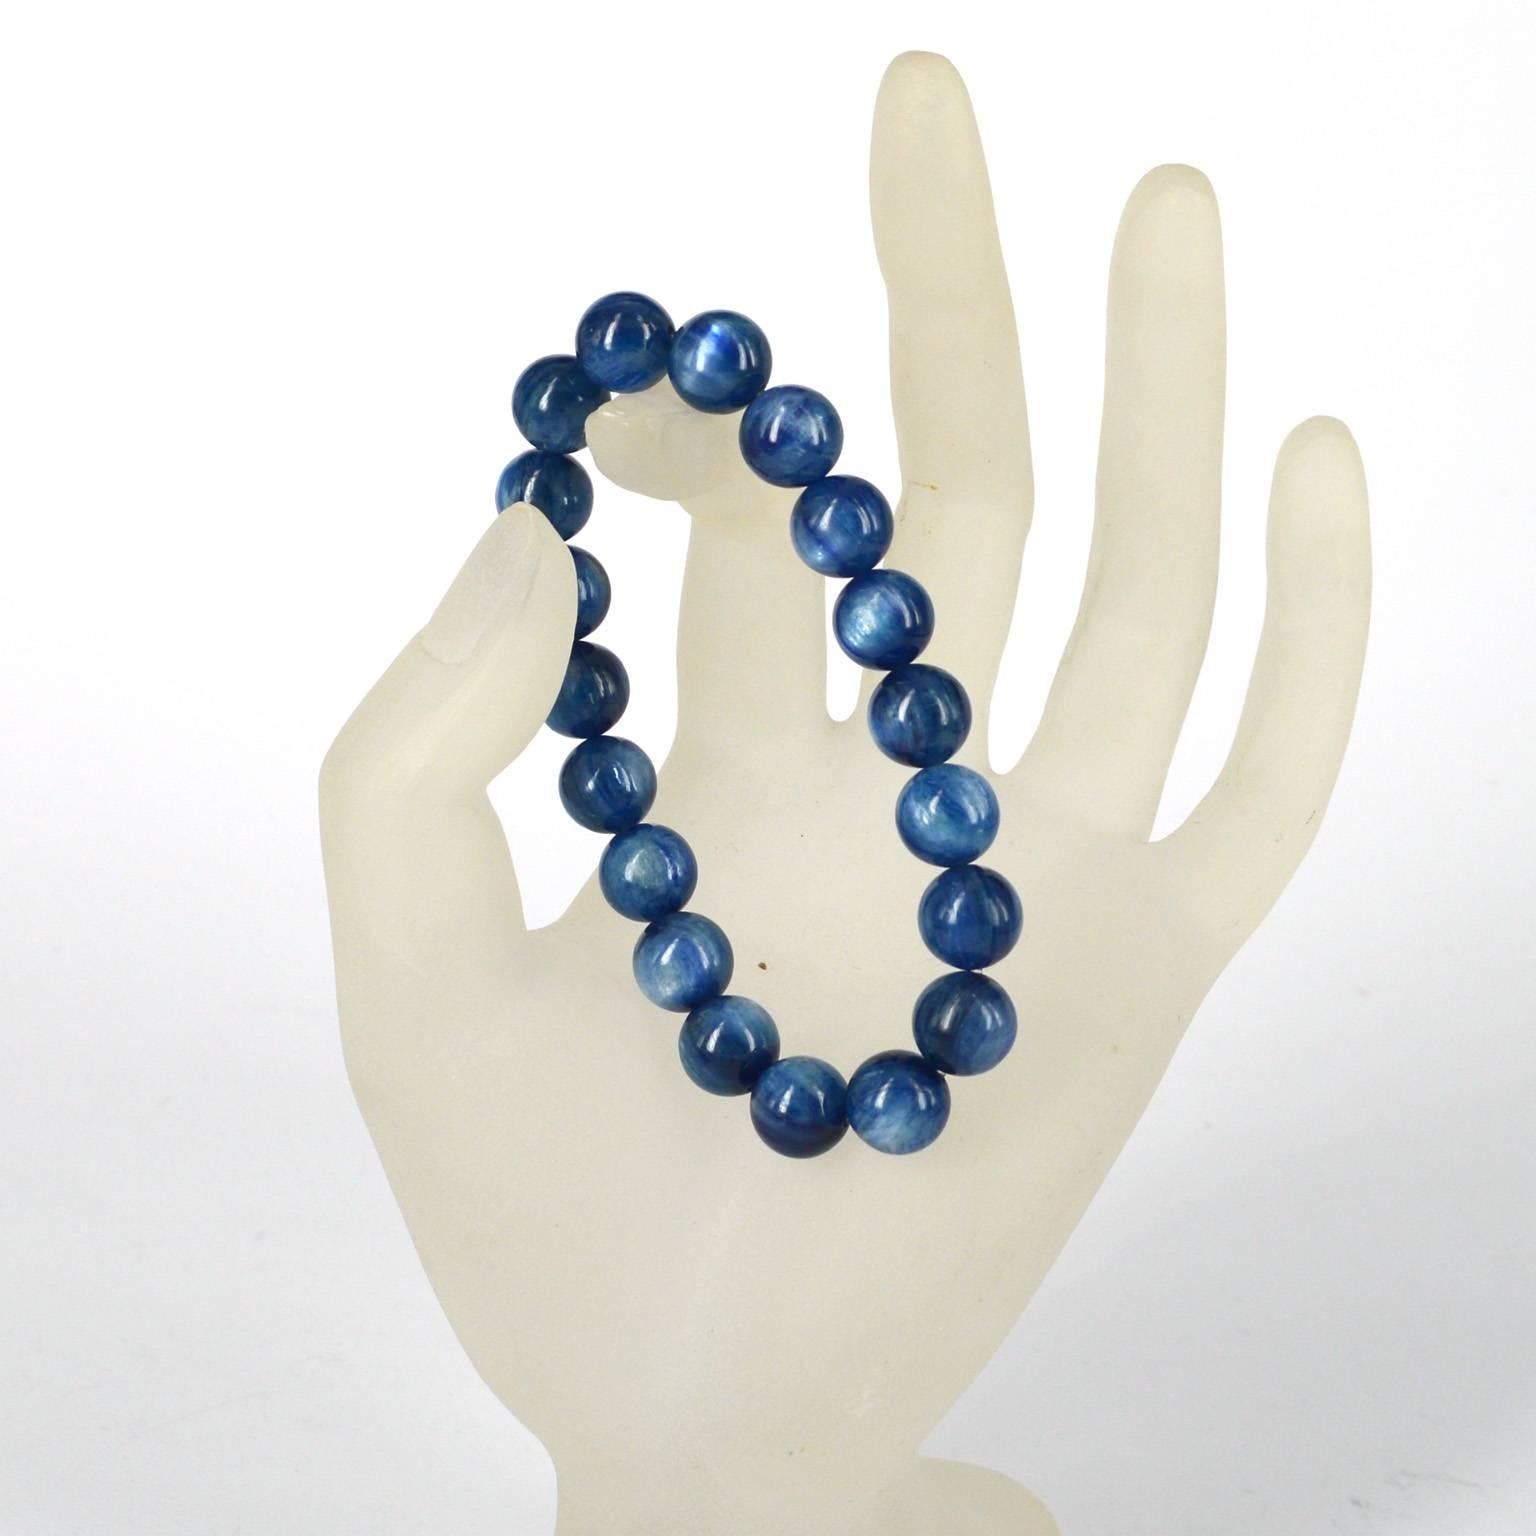 Gorgeous blue Kyanite beaded bracelet.
19 x 10mm polished round threaded on elastic.
Kyanite is a gemstone quality aluminum silicate sometimes referred to as disthene, rhaeticite or cyanite. Its name is derived from the Greek word 'kuanos' or